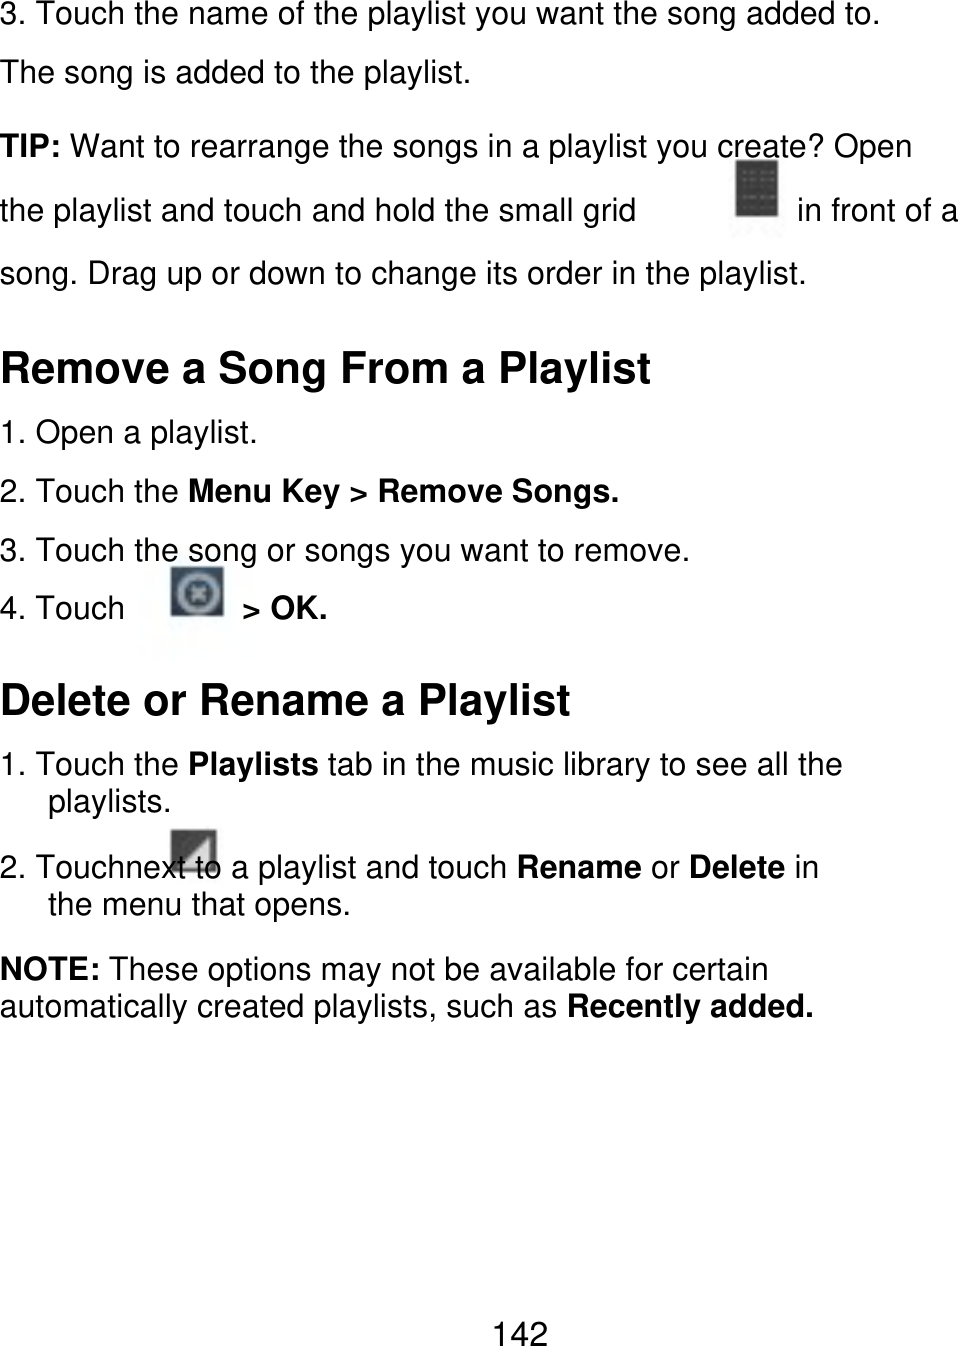 3. Touch the name of the playlist you want the song added to. The song is added to the playlist. TIP: Want to rearrange the songs in a playlist you create? Open the playlist and touch and hold the small grid in front of a song. Drag up or down to change its order in the playlist. Remove a Song From a Playlist 1. Open a playlist. 2. Touch the Menu Key &gt; Remove Songs. 3. Touch the song or songs you want to remove. 4. Touch &gt; OK. Delete or Rename a Playlist 1. Touch the Playlists tab in the music library to see all the    playlists. 2. Touchnext to a playlist and touch Rename or Delete in    the menu that opens. NOTE: These options may not be available for certain automatically created playlists, such as Recently added. 142 